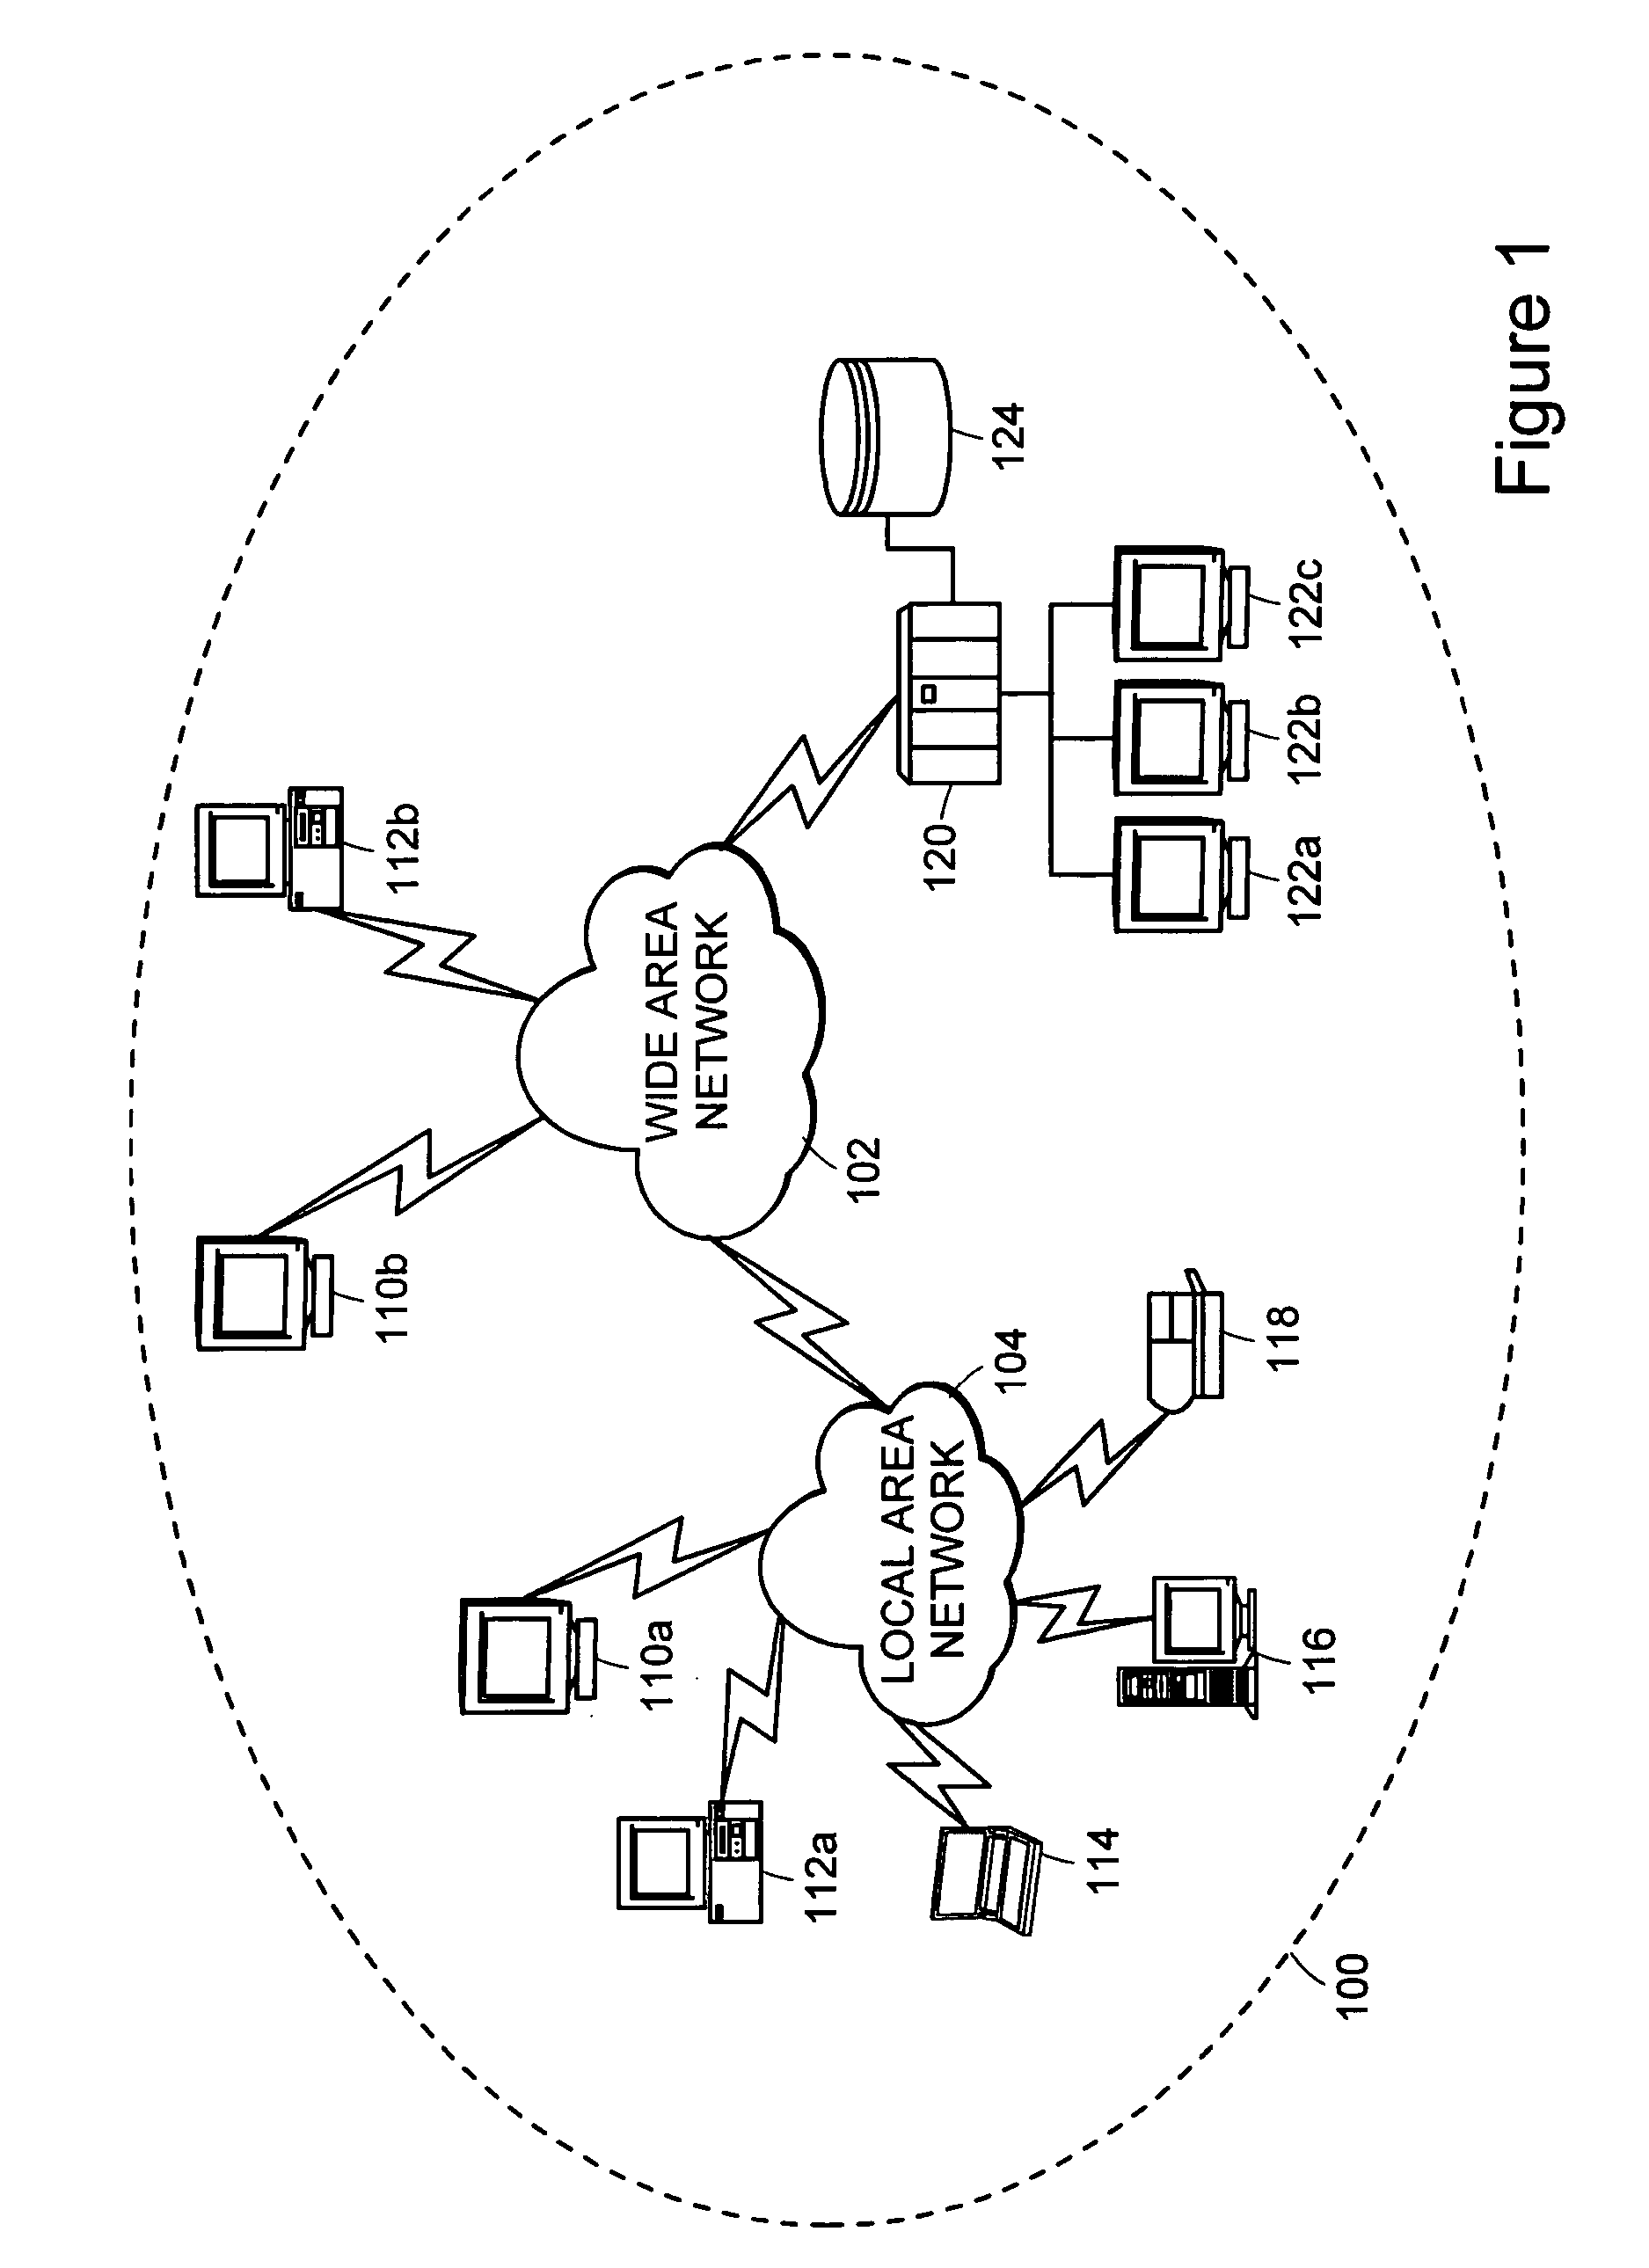 Distributed computer monitoring system and methods for autonomous computer management